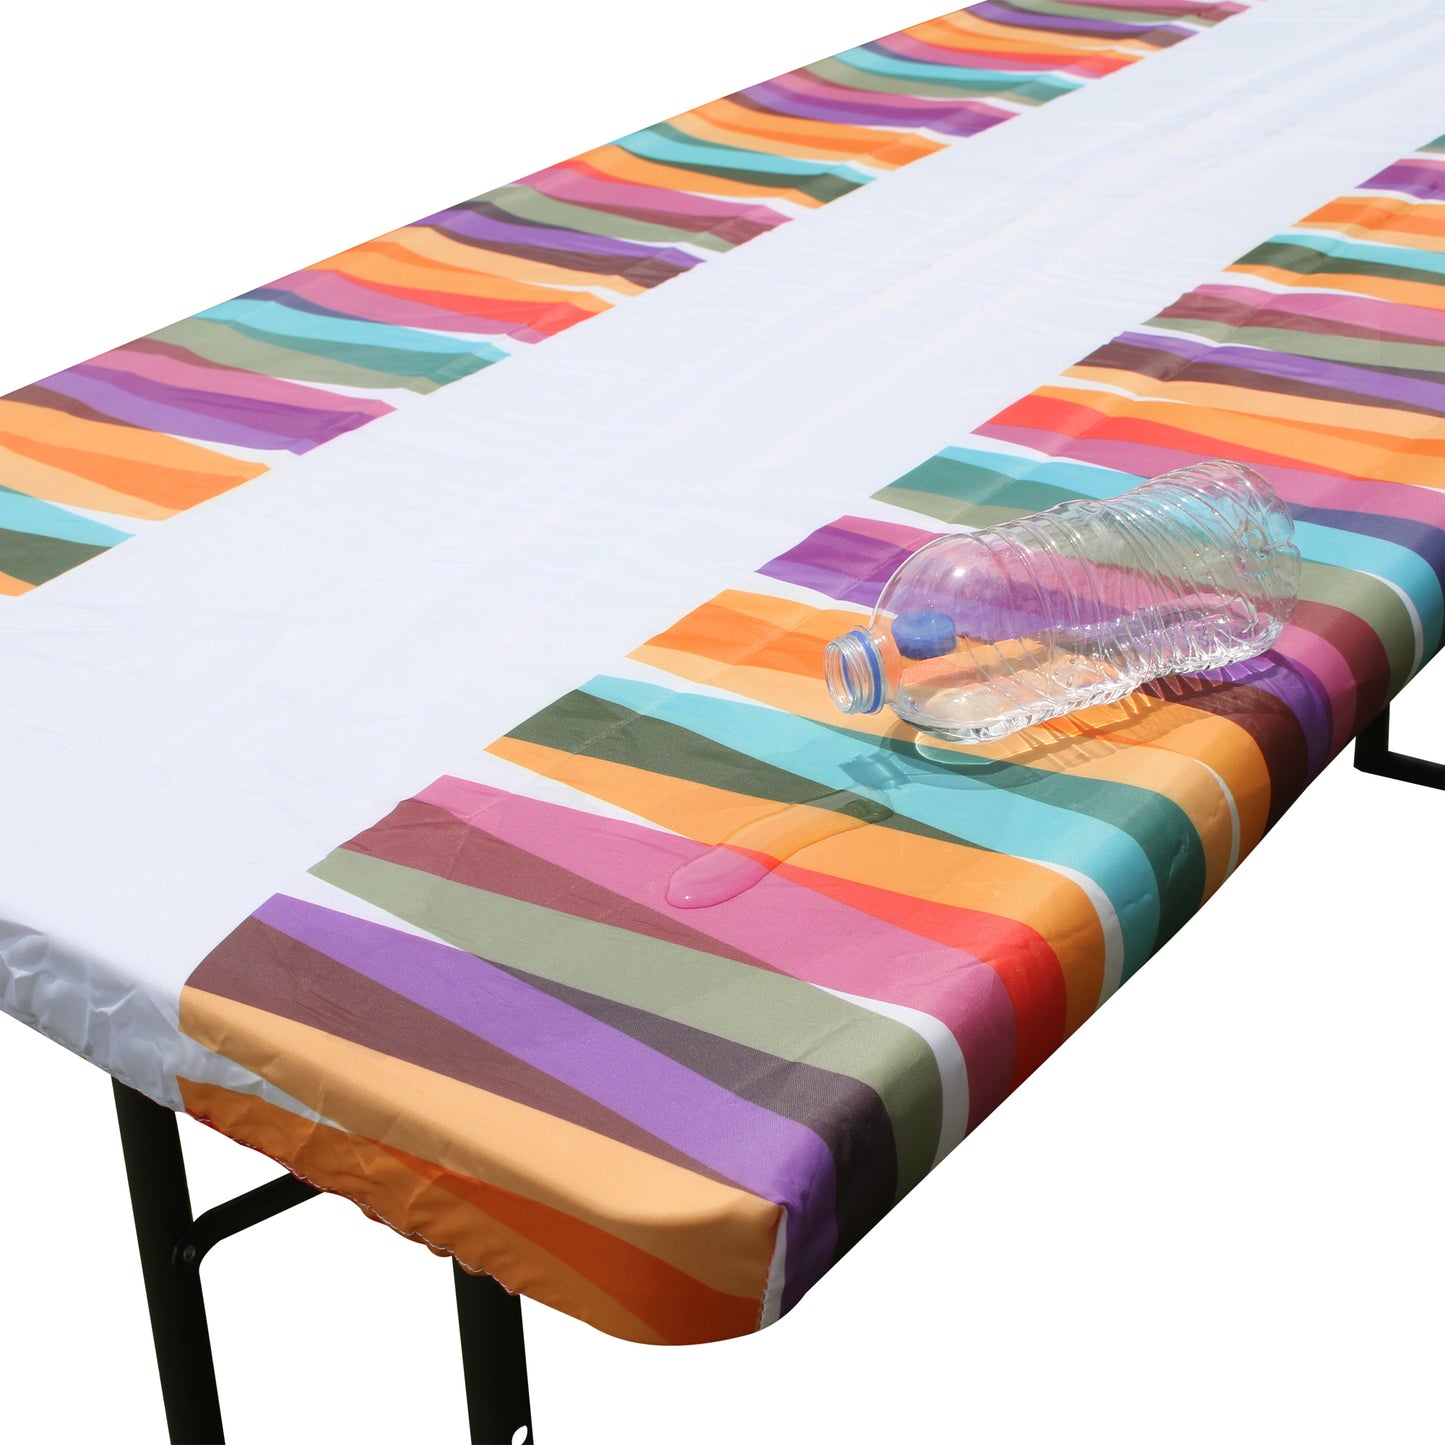 TableCloth PLUS 96" Laces Fitted Polyester Tablecloth for 8' Folding Tables is water resistant